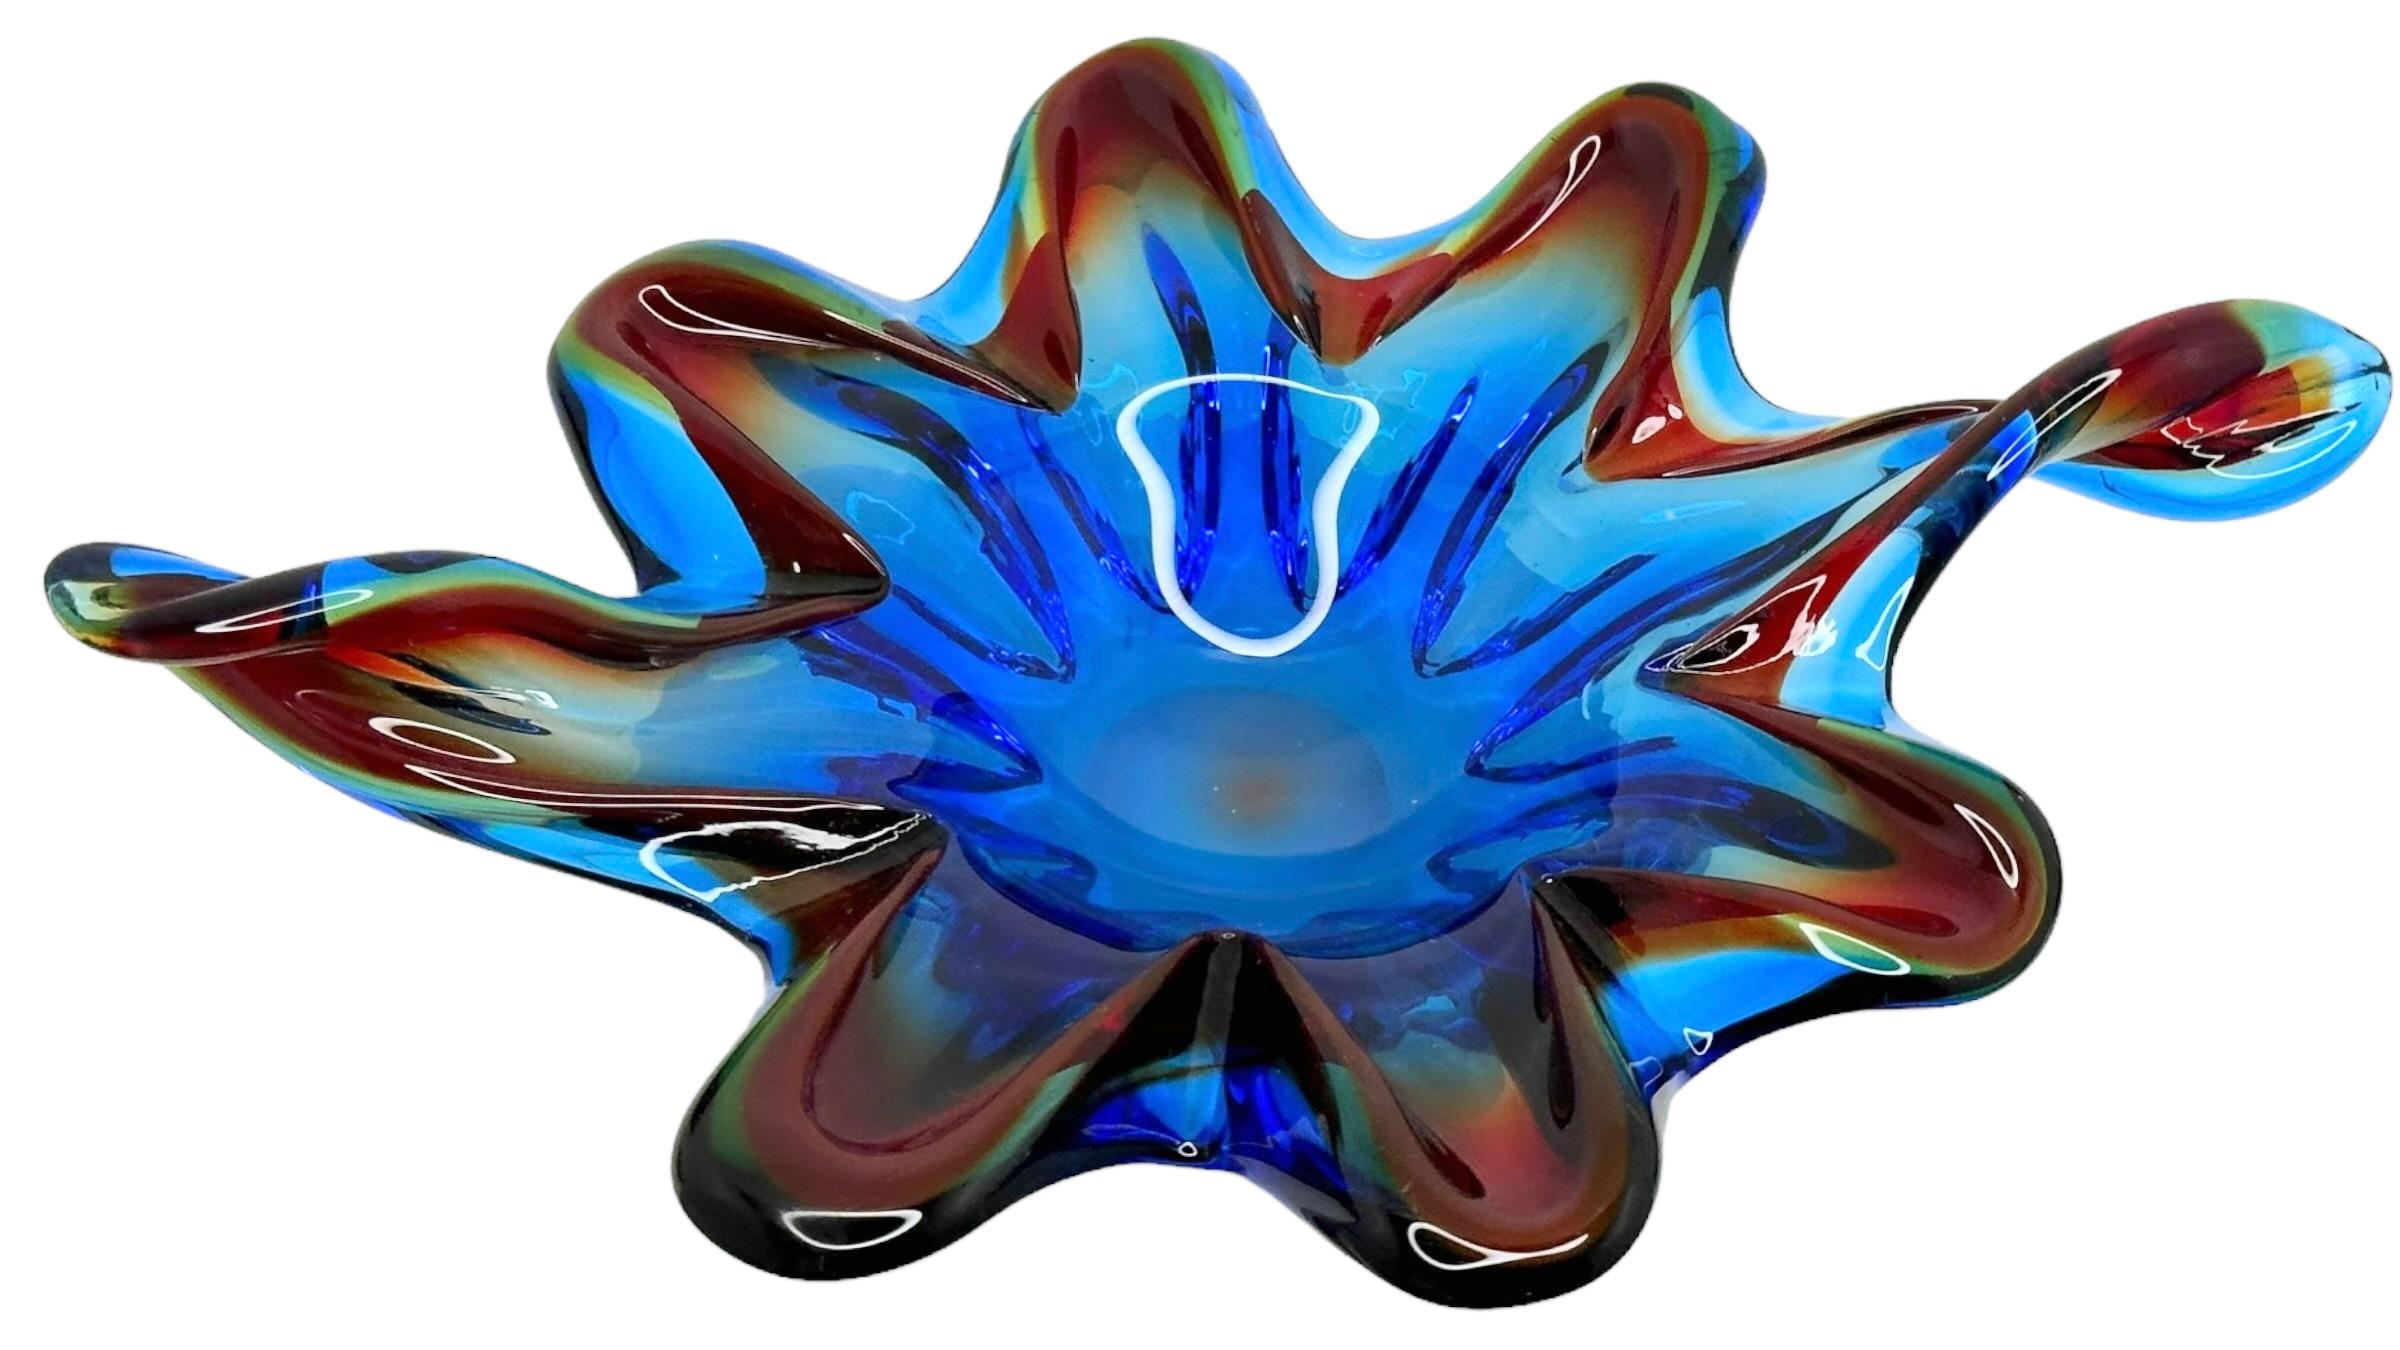 Mid-20th Century Beautiful Blue and red Murano Glass Bowl Catchall Vintage, Italy, 1960s For Sale